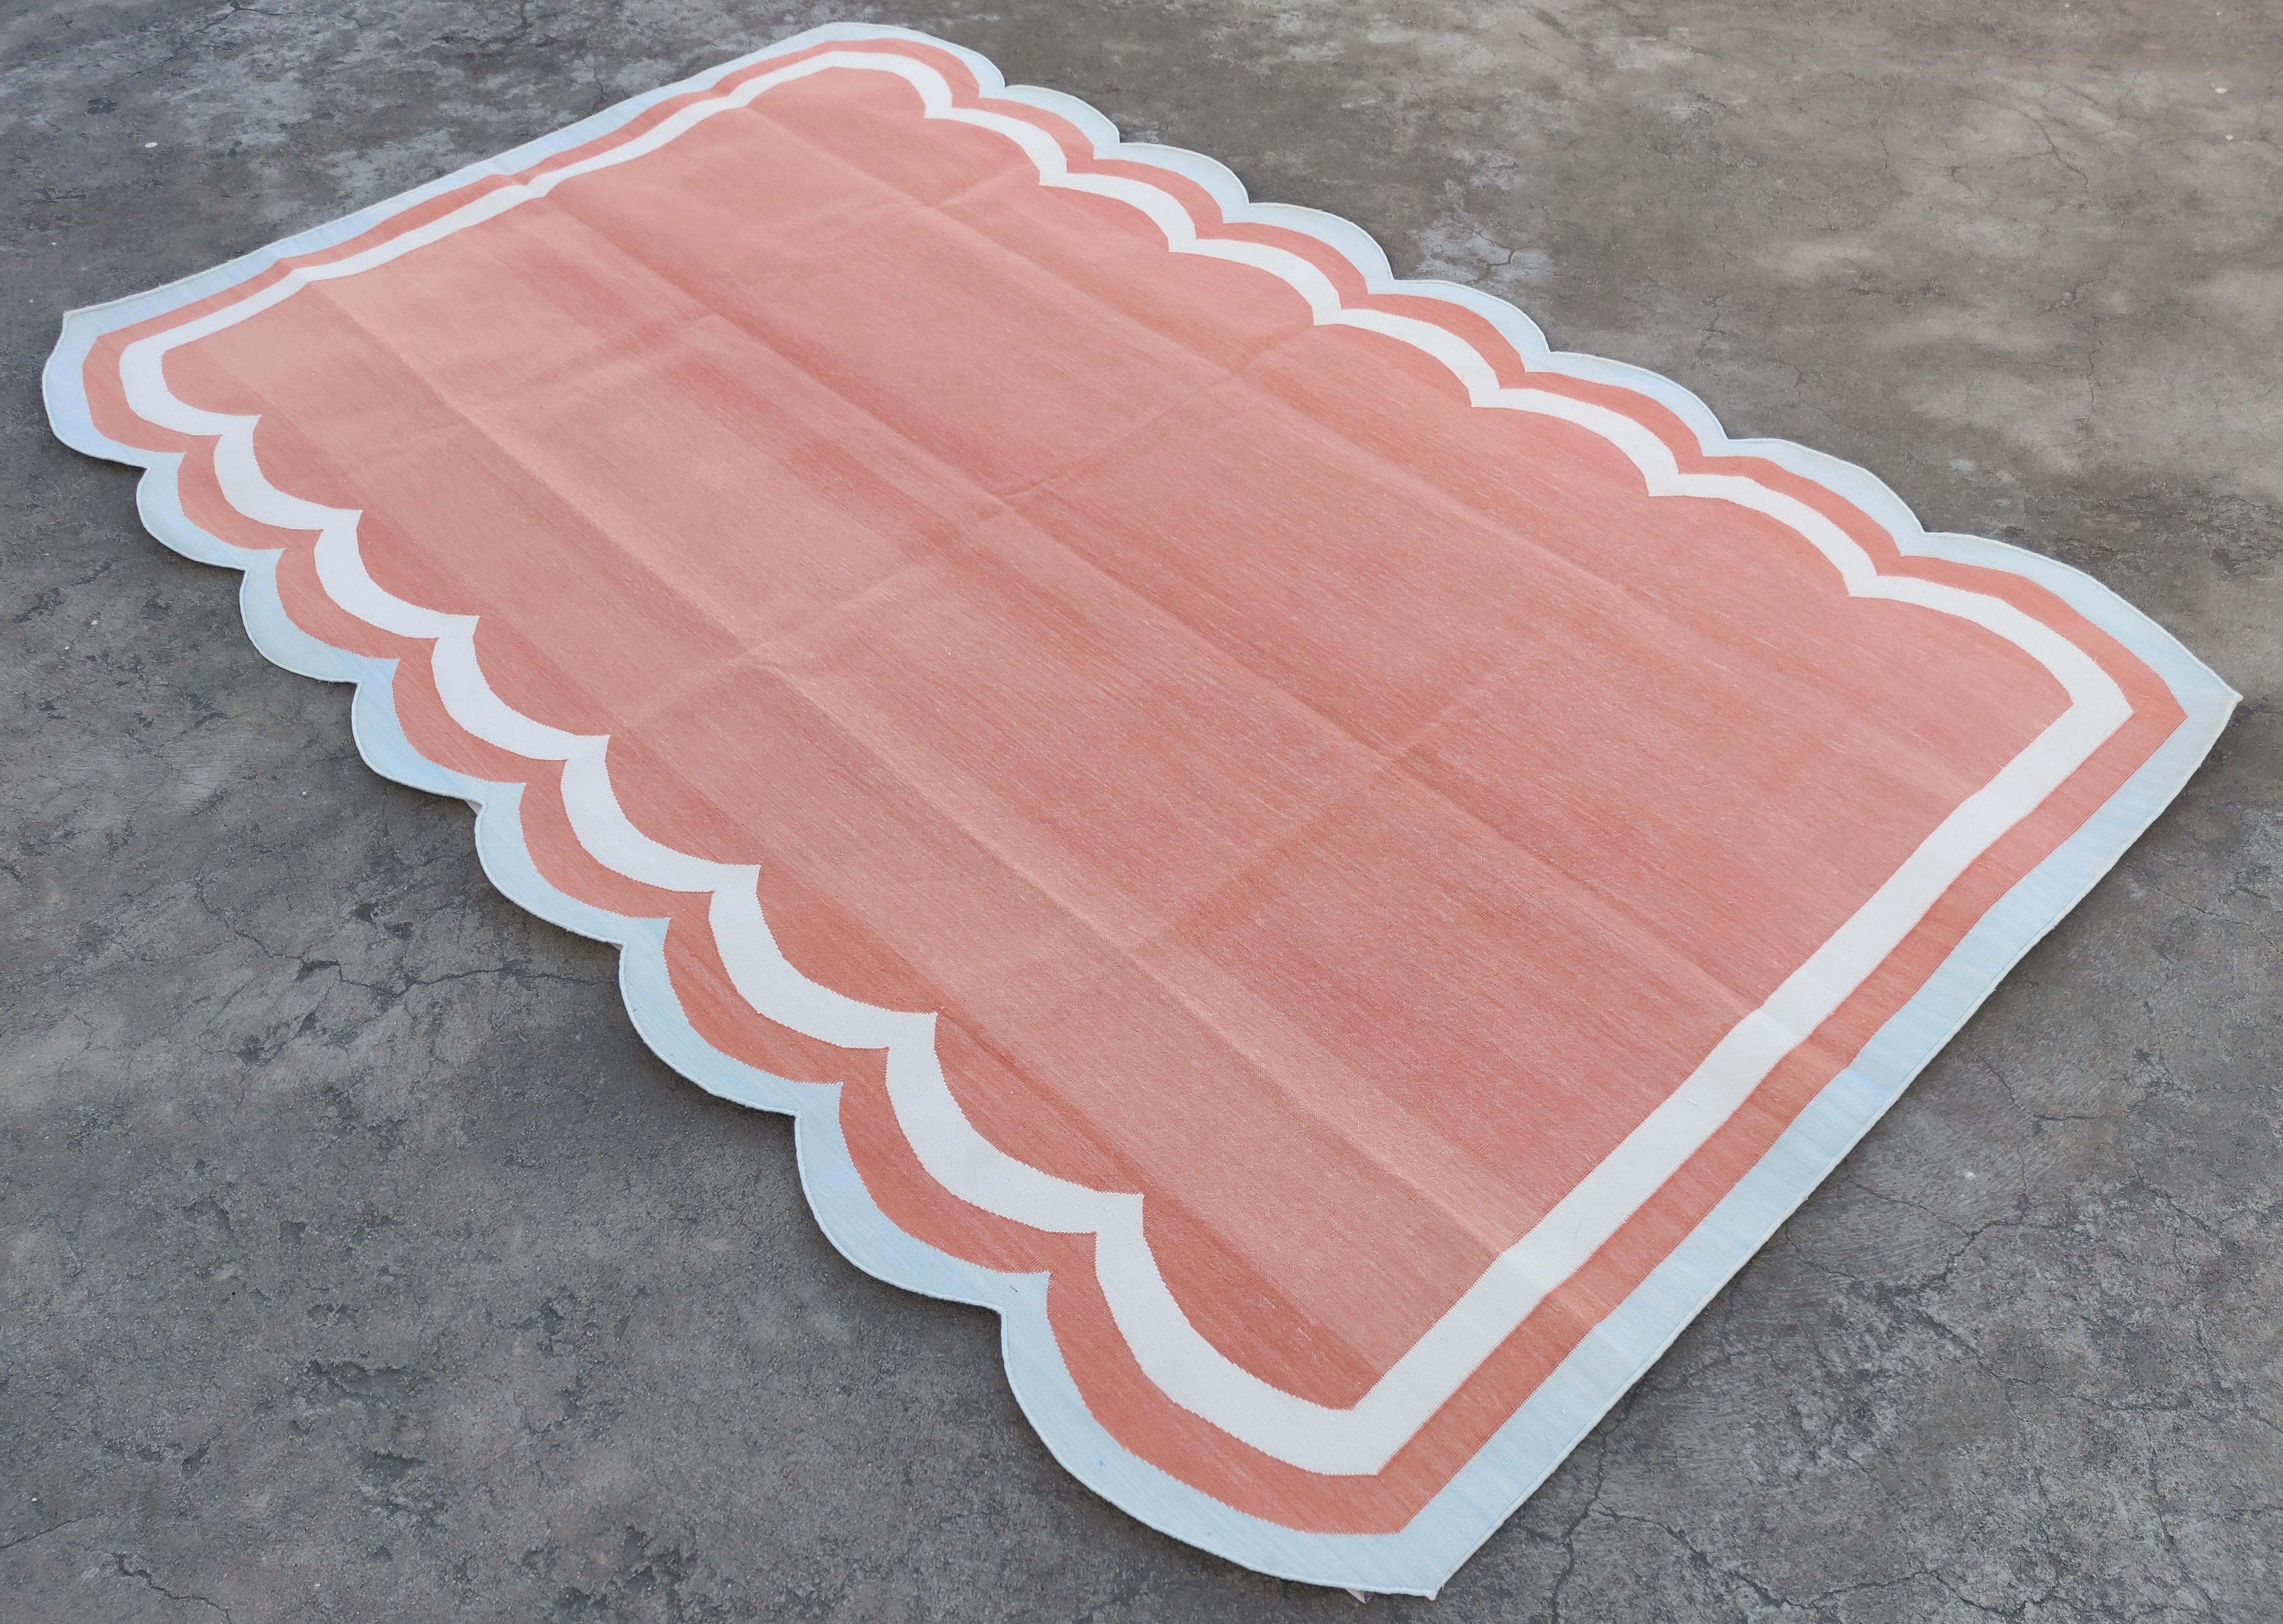 Cotton Vegetable Dyed Terracotta Red and Sky Blue Scalloped Striped Indian Dhurrie Rug-5'x8' 

These special flat-weave dhurries are hand-woven with 15 ply 100% cotton yarn. Due to the special manufacturing techniques used to create our rugs, the